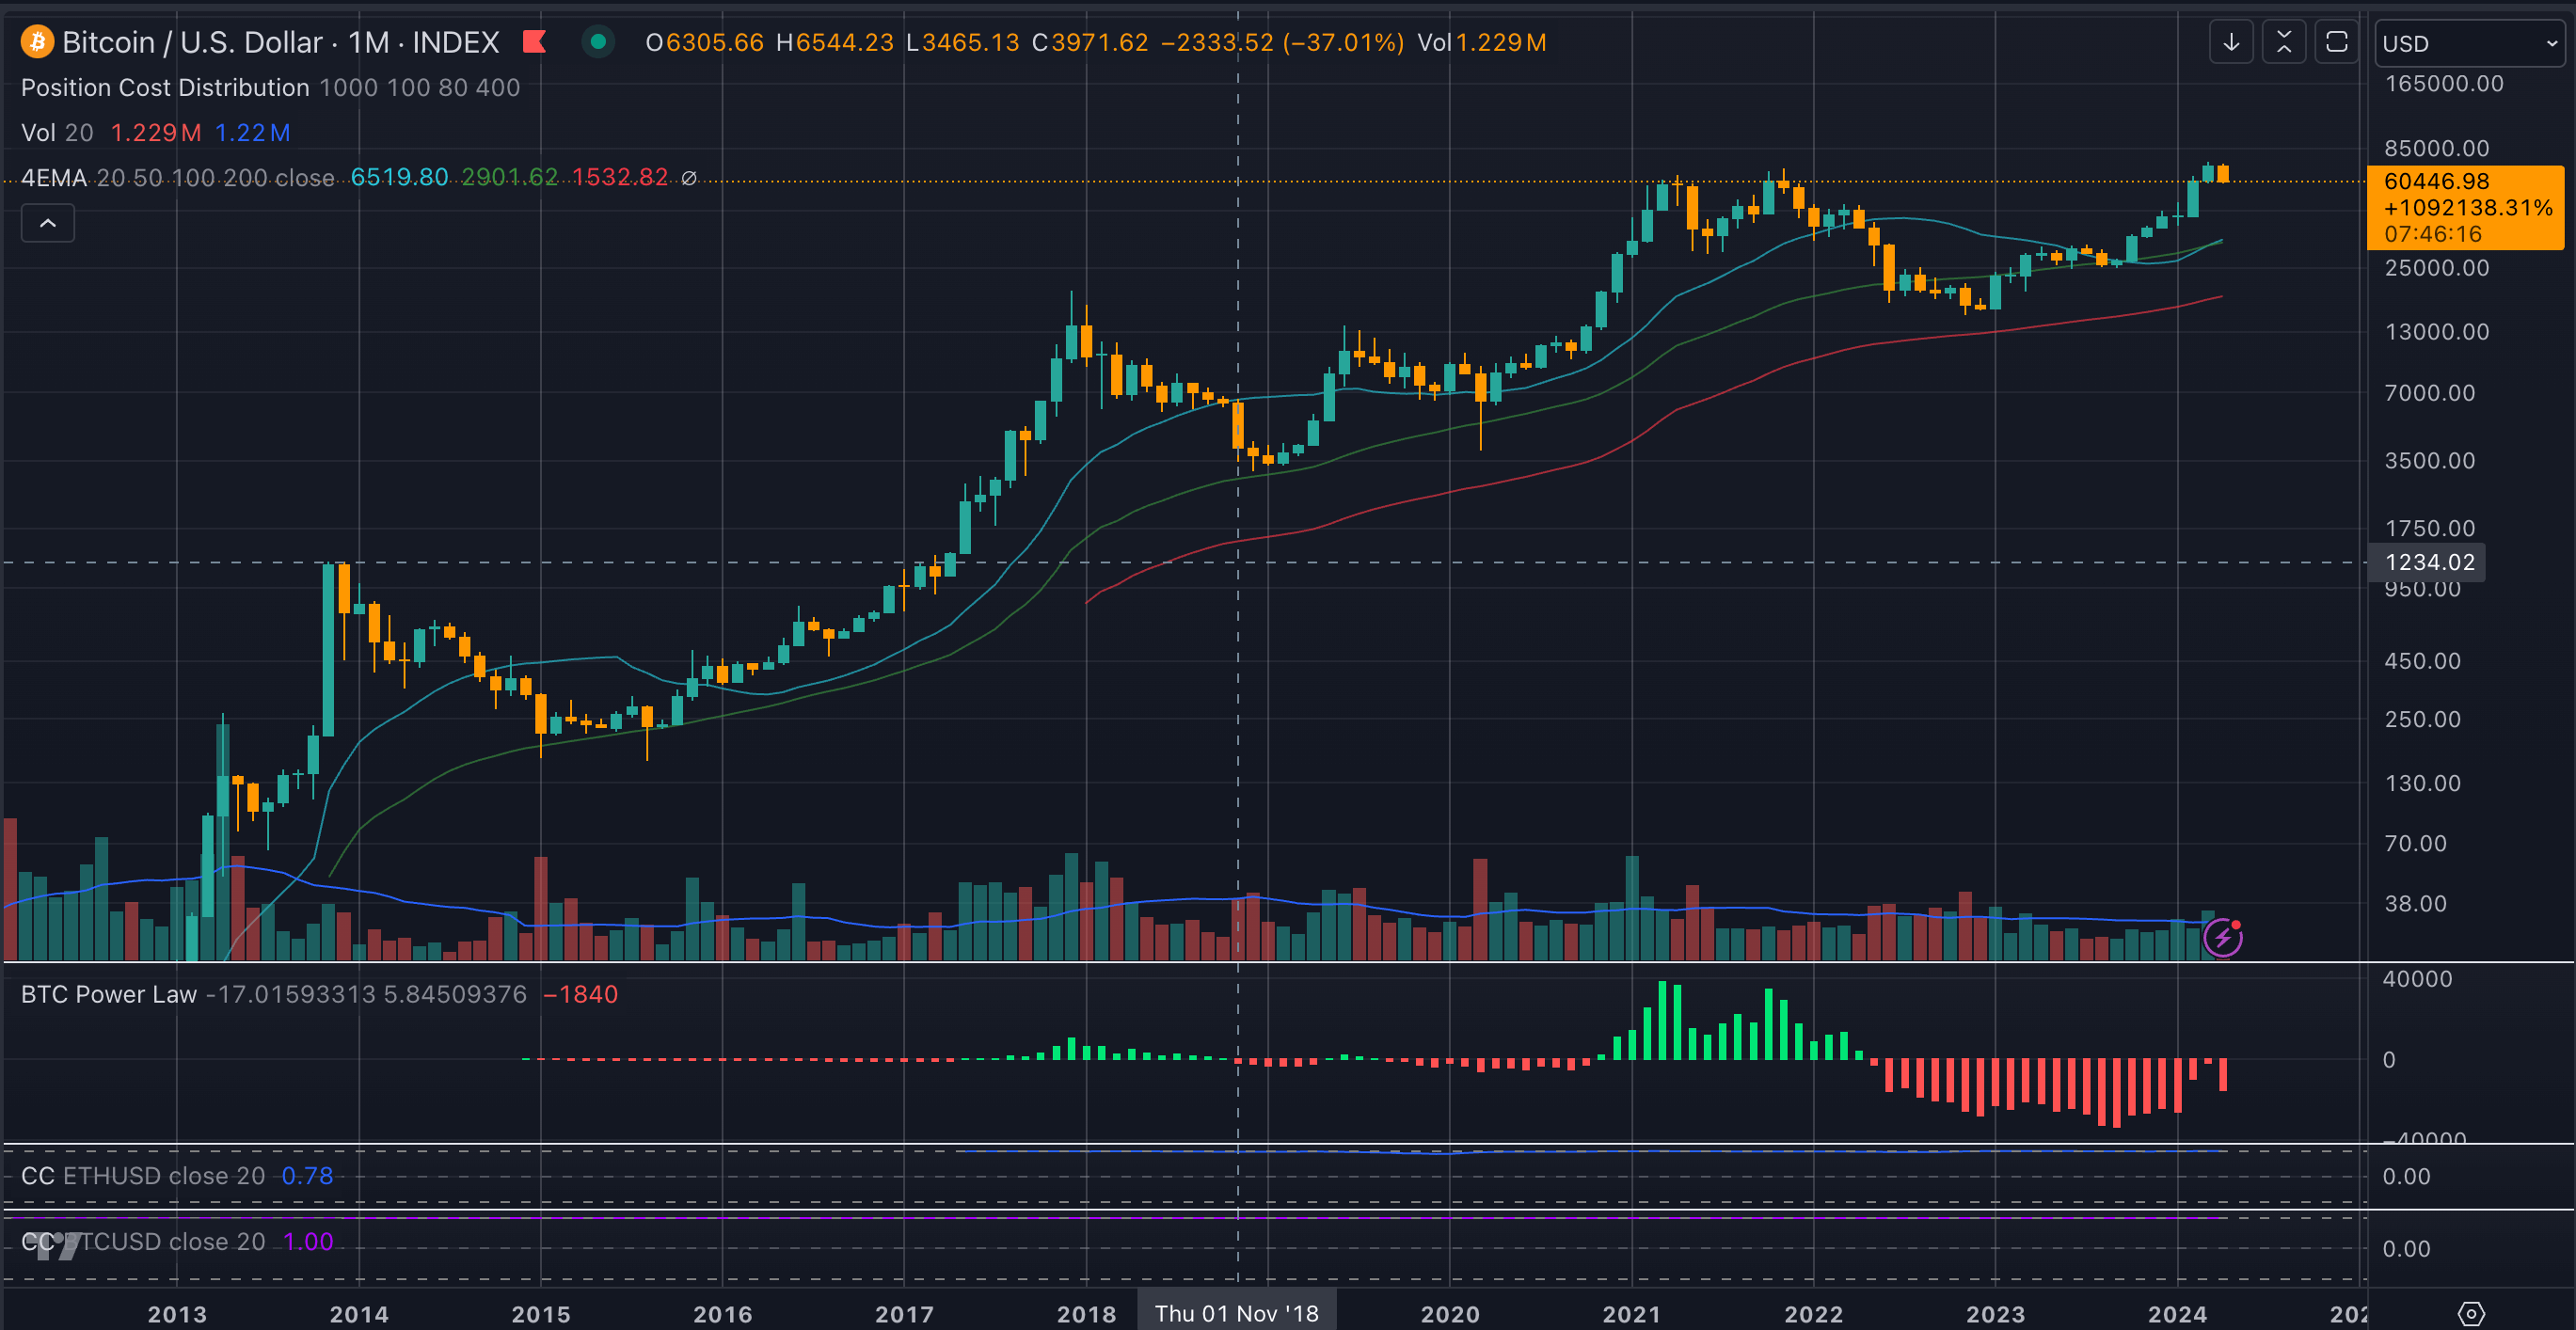 Bitcoin monthly candlesticks since 2013 (TradingView)